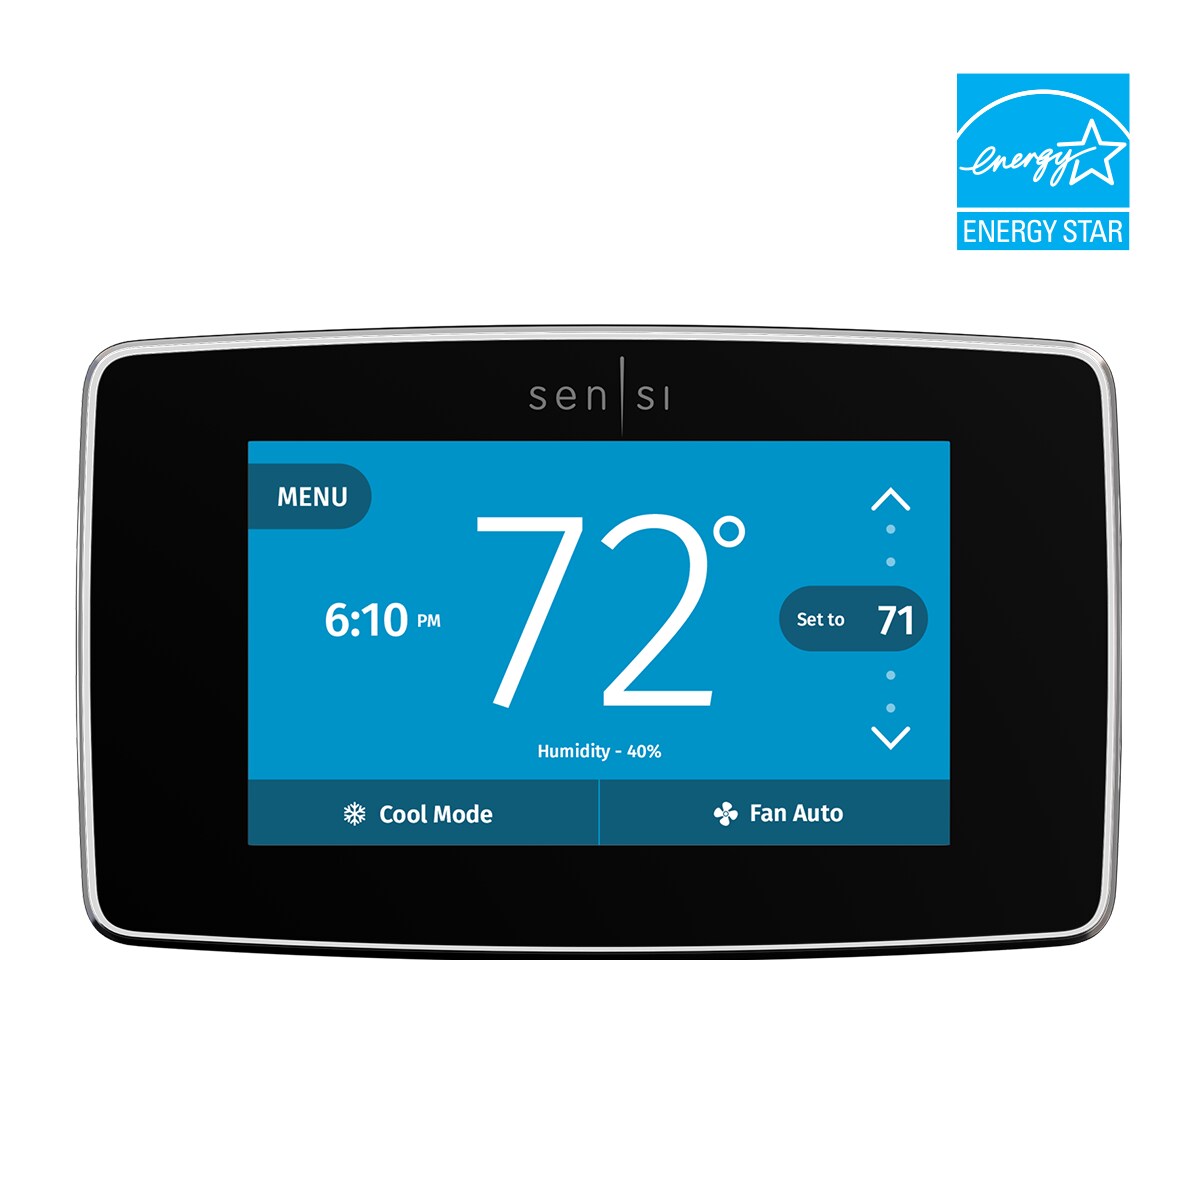 Emerson Smart Thermostats At Lowes